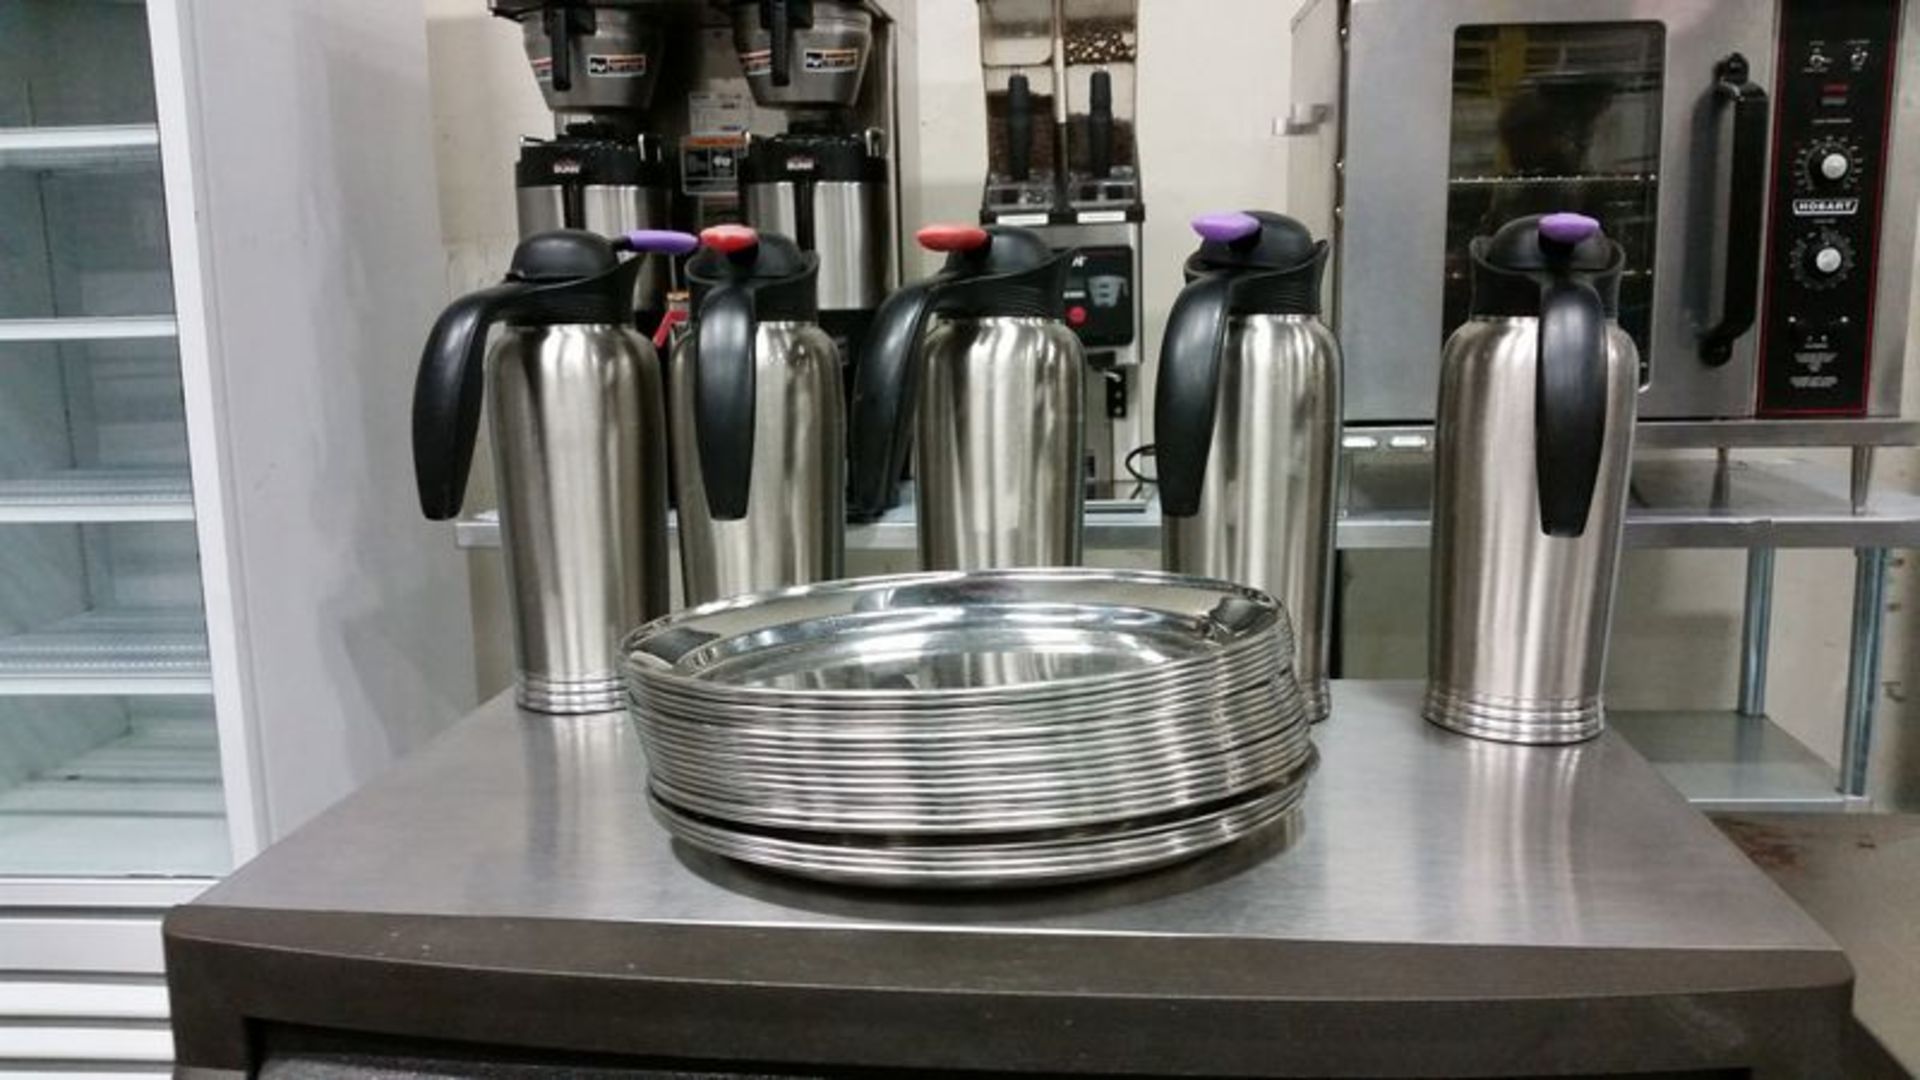 6 cream jugs with 20 stainless steel platters